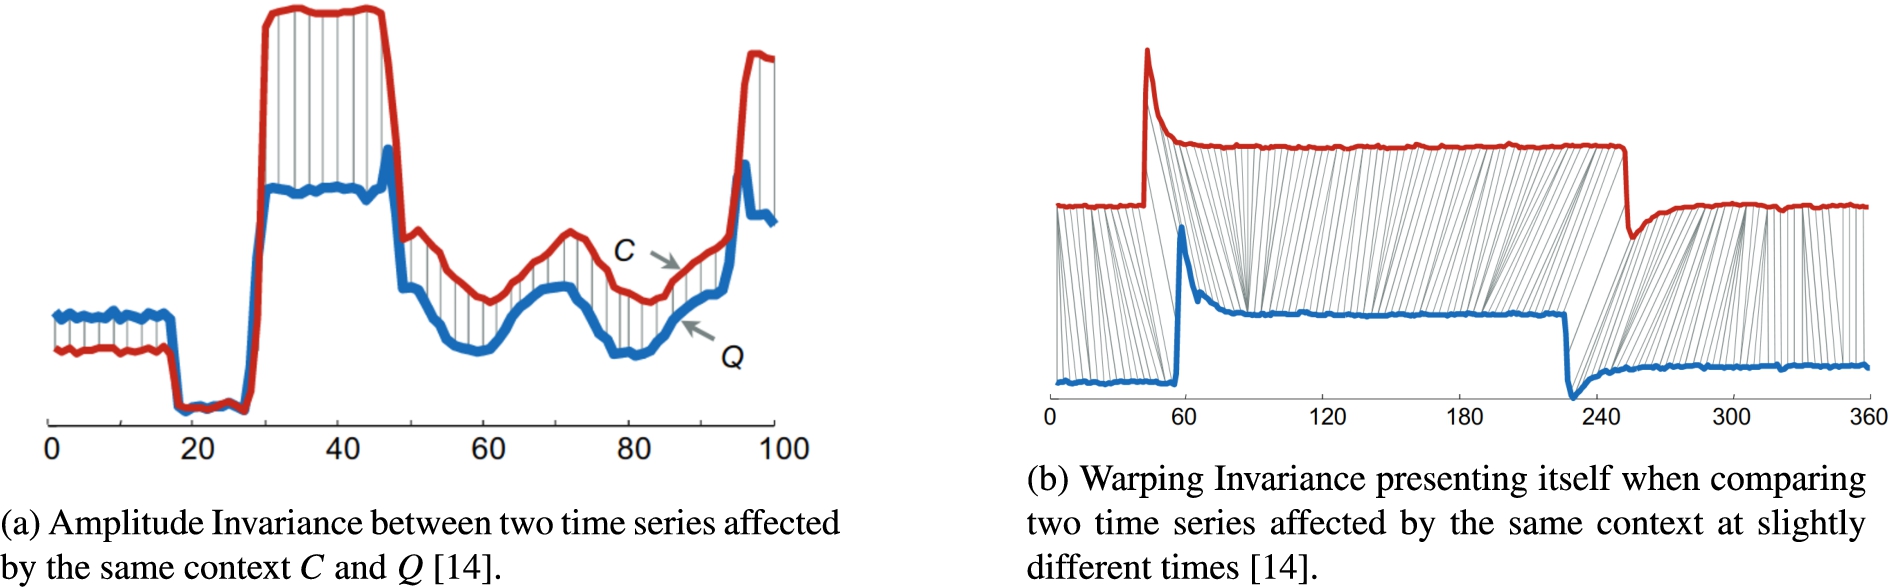 Two different invariances showing time series data affected by the context.